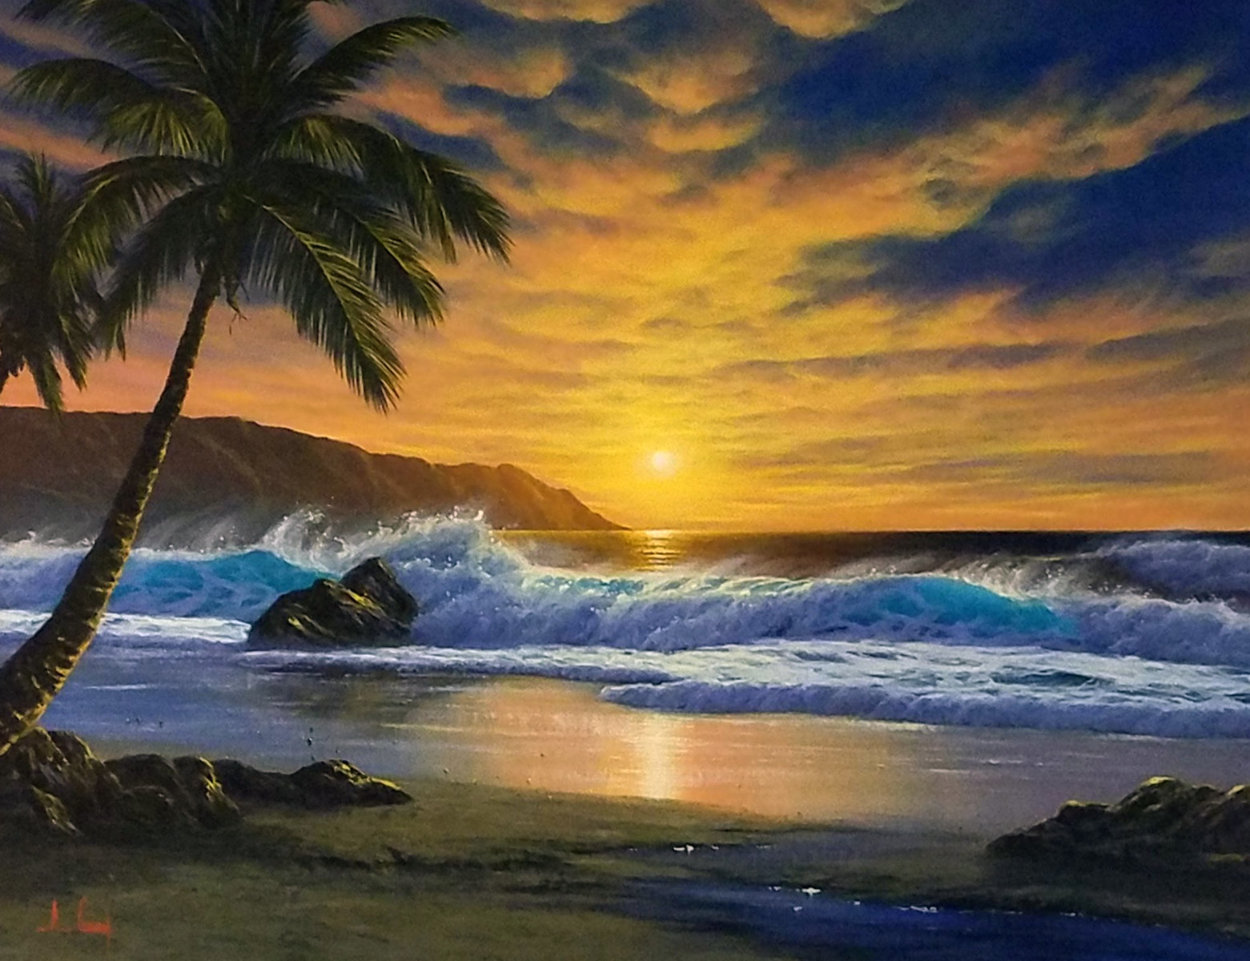 Untitled Seascape (Maui Beach) 1988 33x43 - Huge Original Painting by Anthony Casay